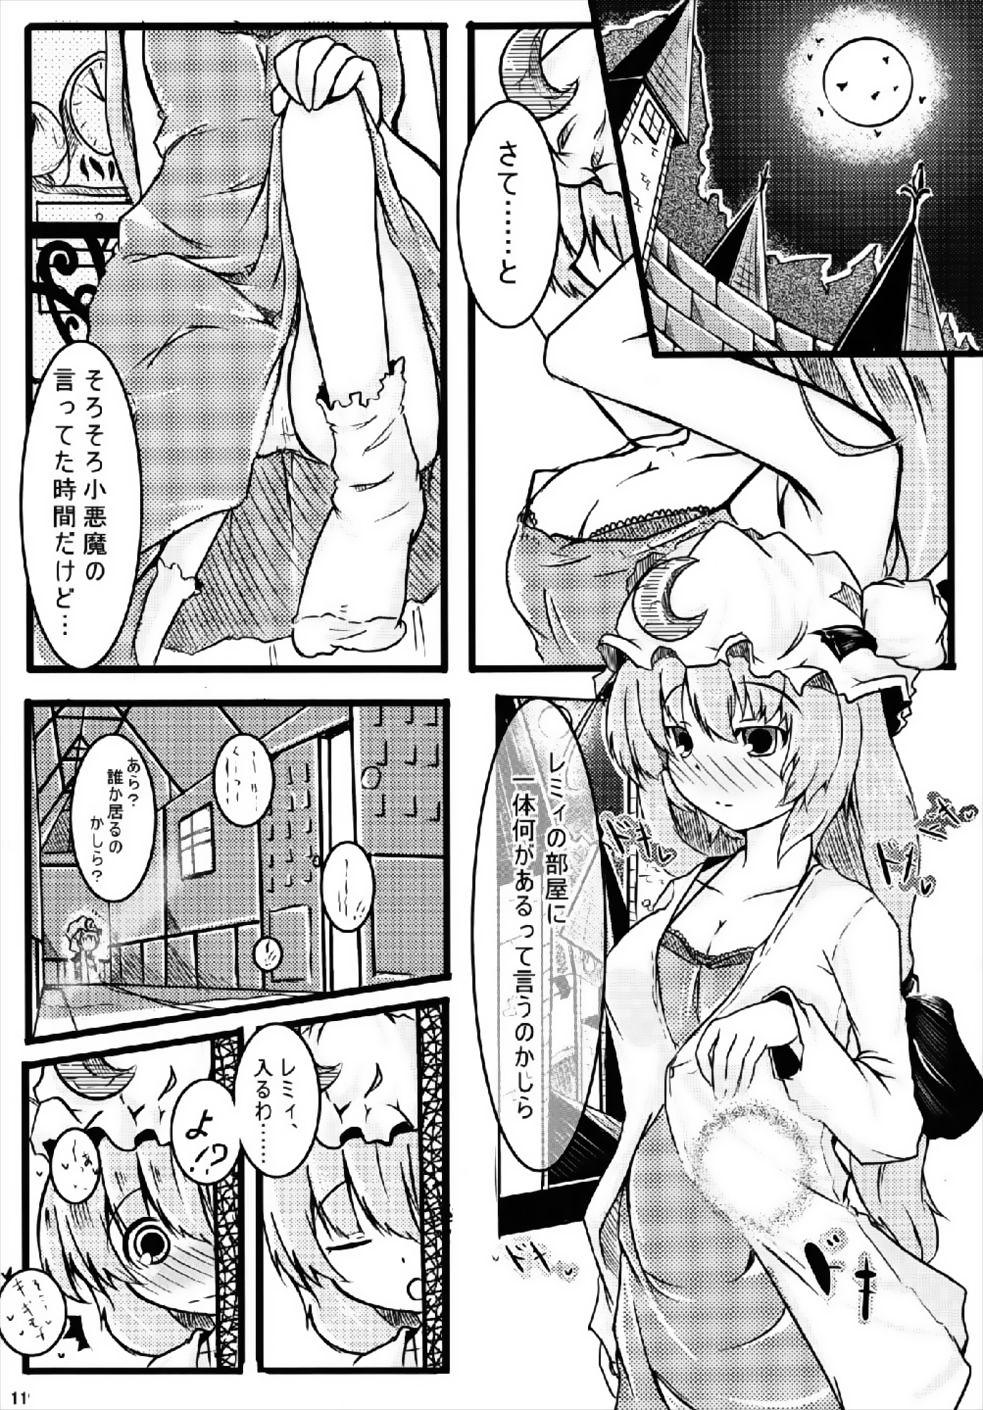 Latex RemiFlaPatche! - Touhou project Caught - Page 10